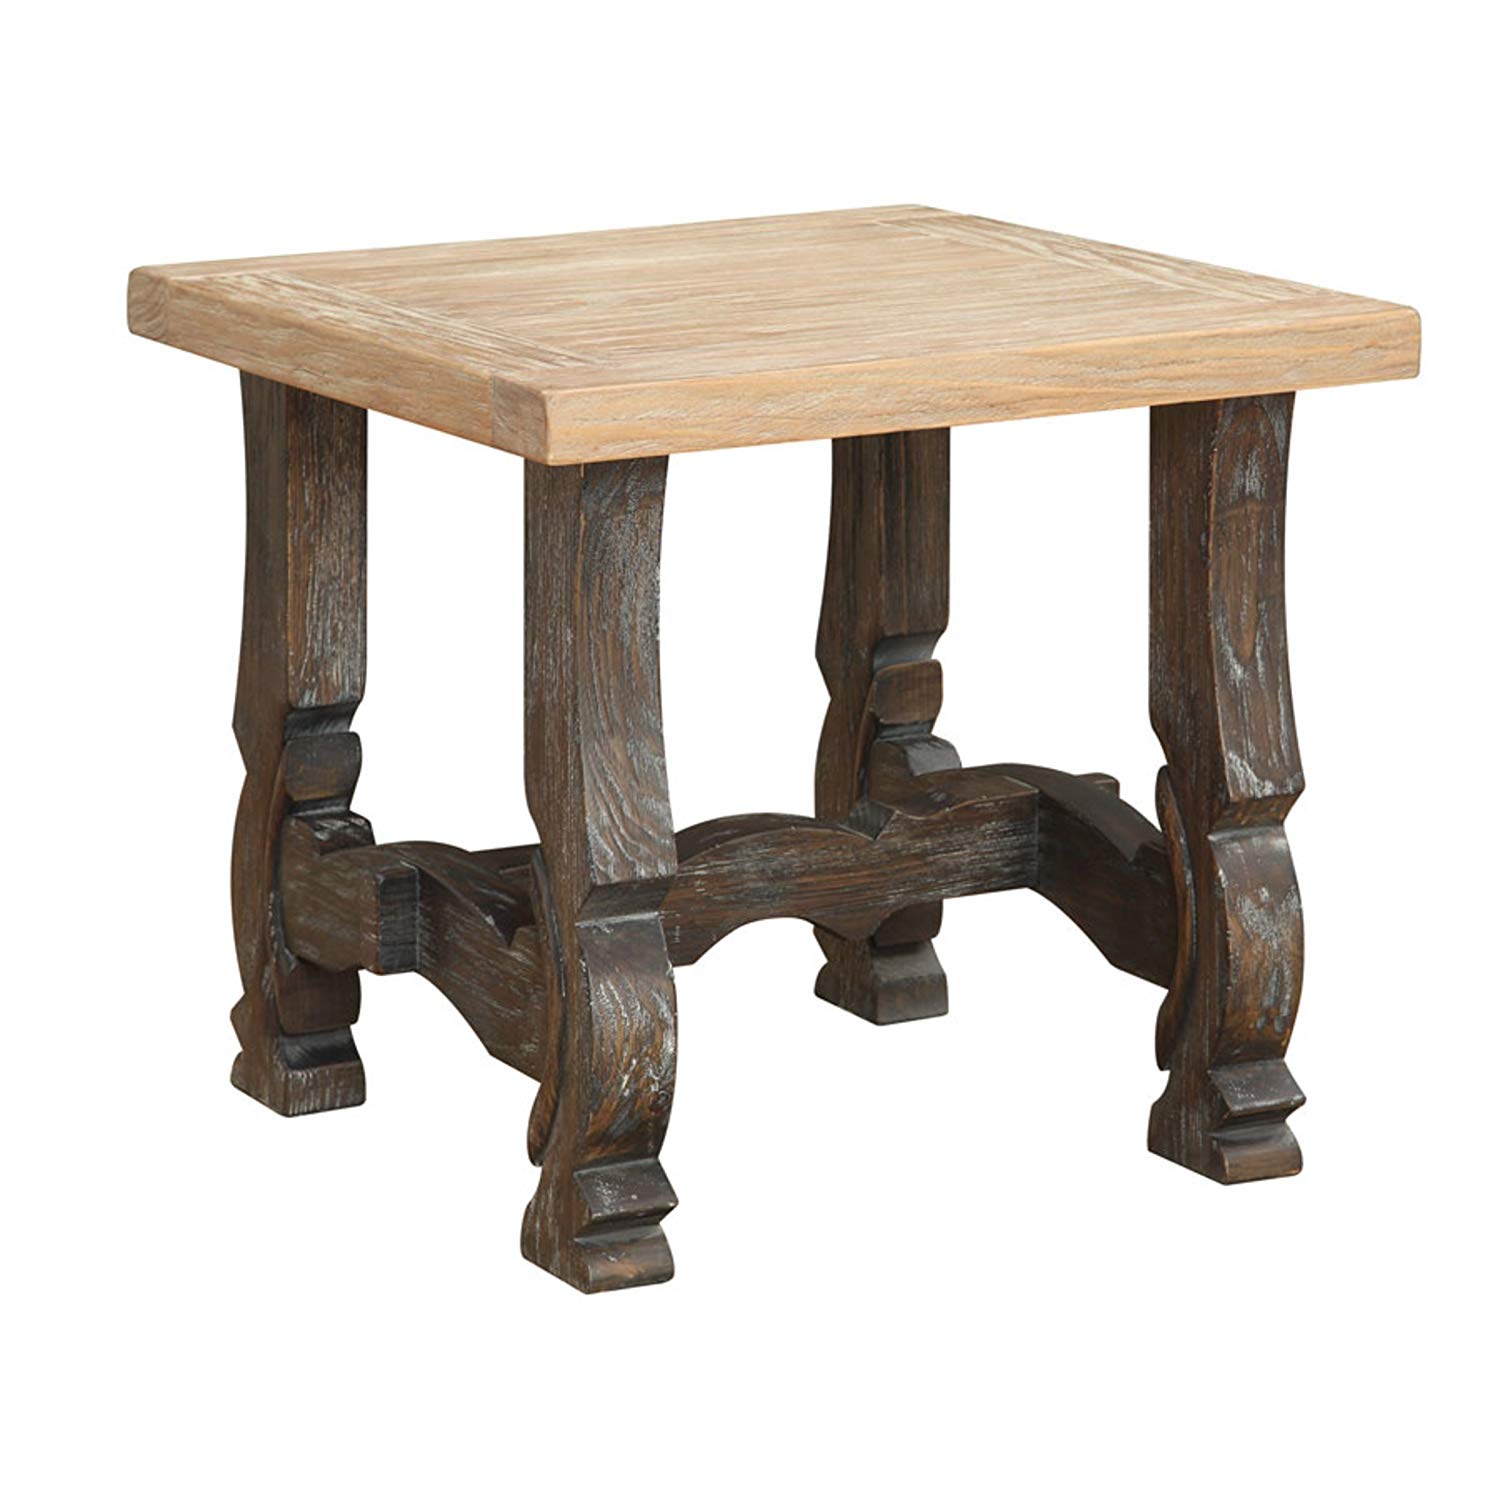 emerald home barcelona rustic pine and dark brown end tables table with plank style top carved base kitchen dining riverside furniture newburgh large coffee white universal panel